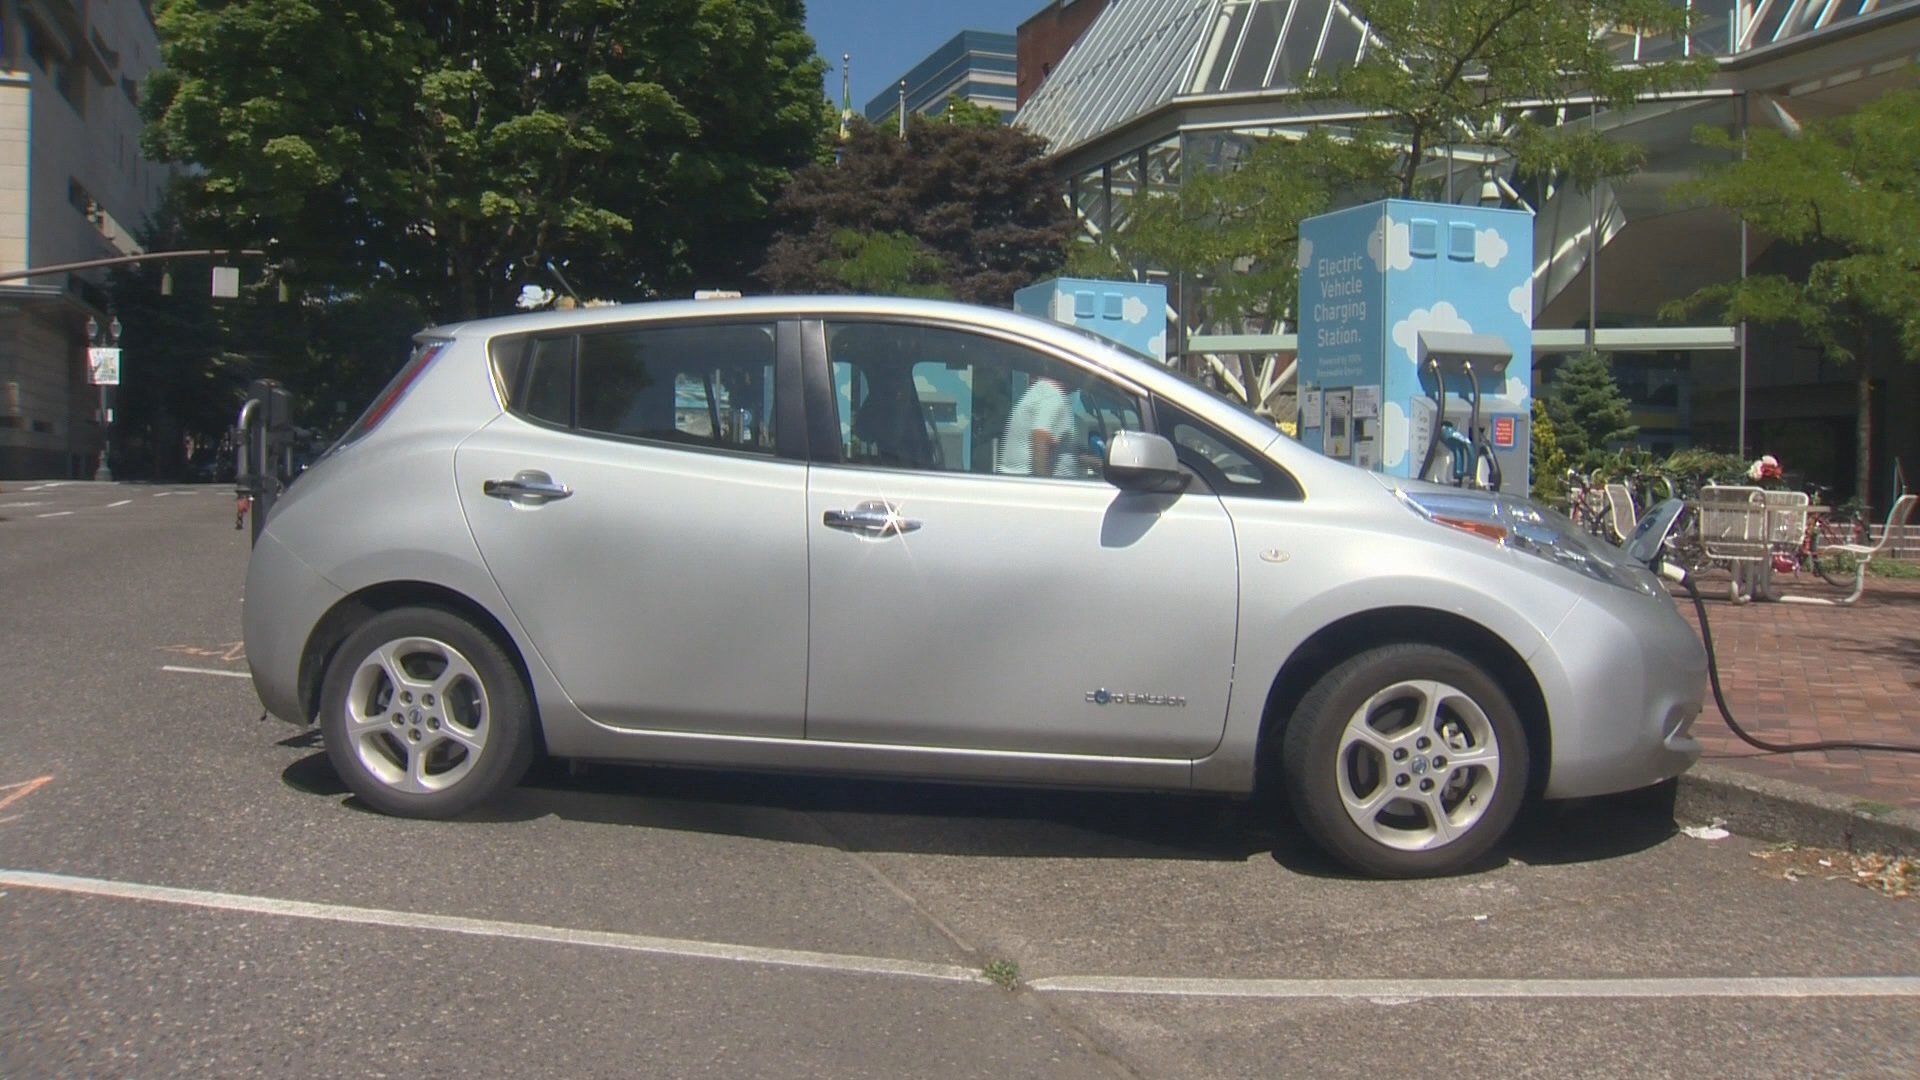 Electric vehicle rebates included in Oregon transportation bill